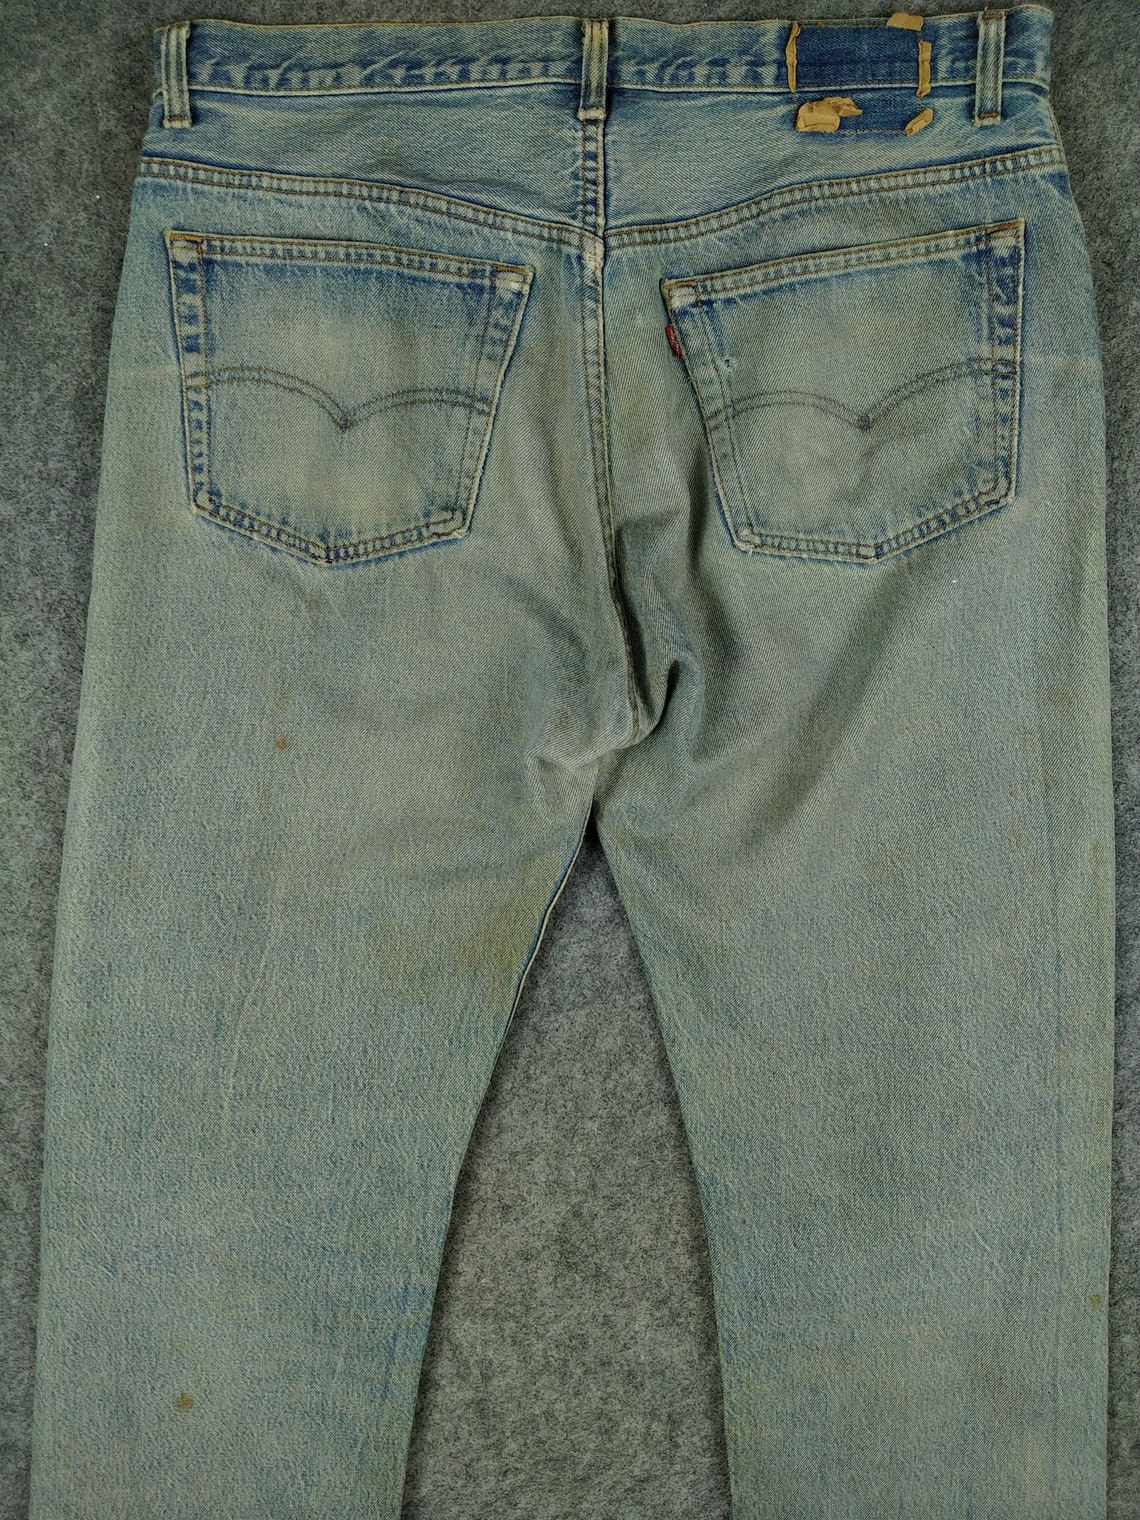 90s Vintage Levi's 501 USA Dirty Denim 36x32 Red Tab Faded - Etsy